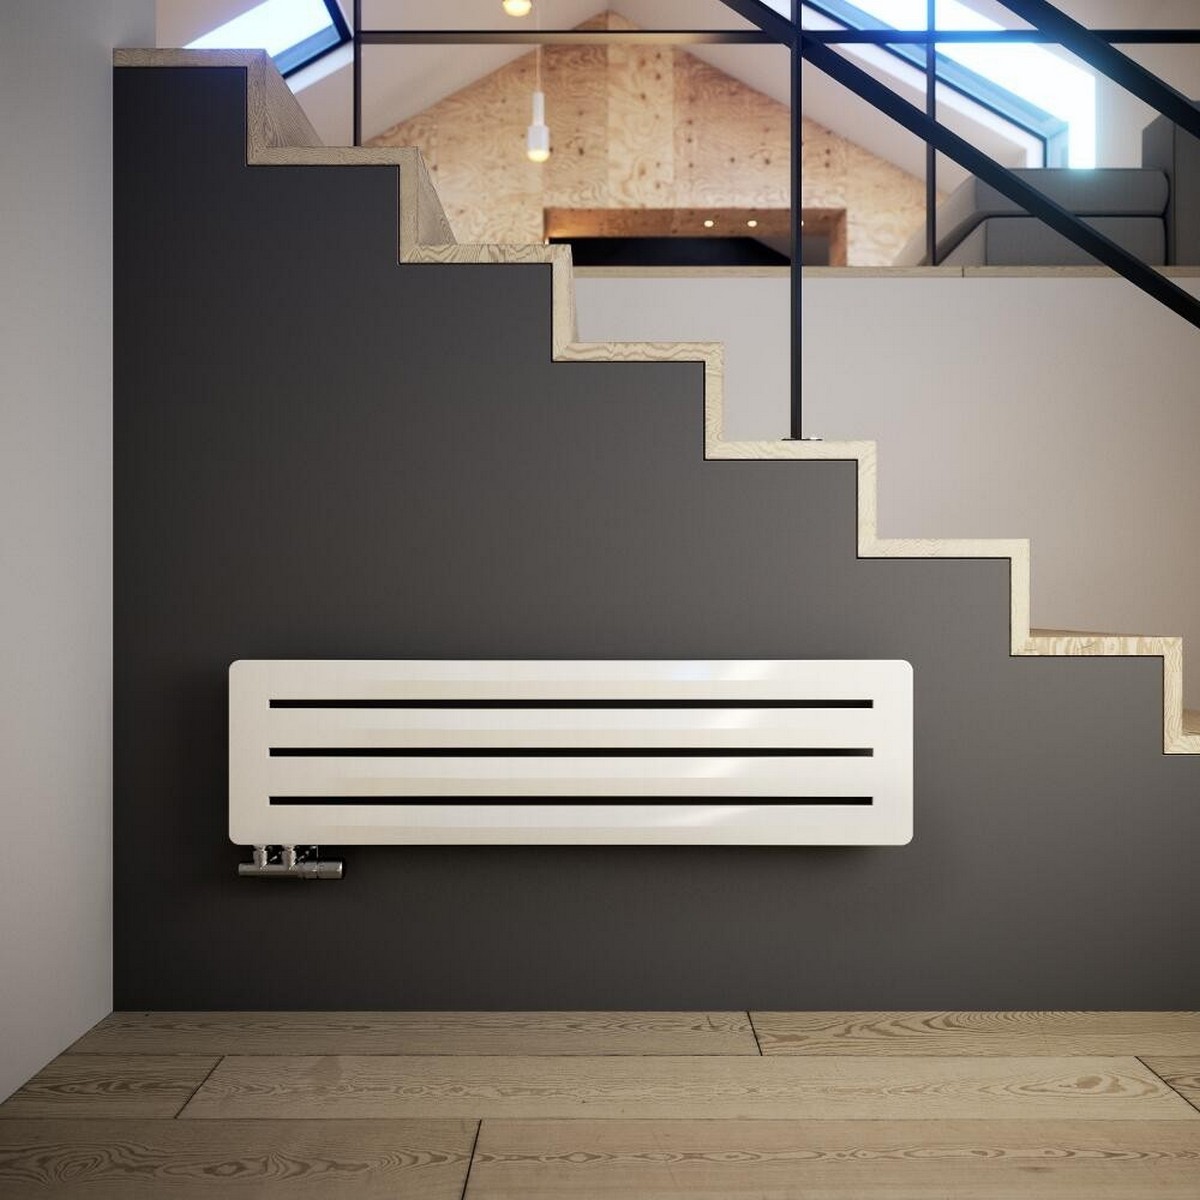 How to choose the perfect radiator for your home?